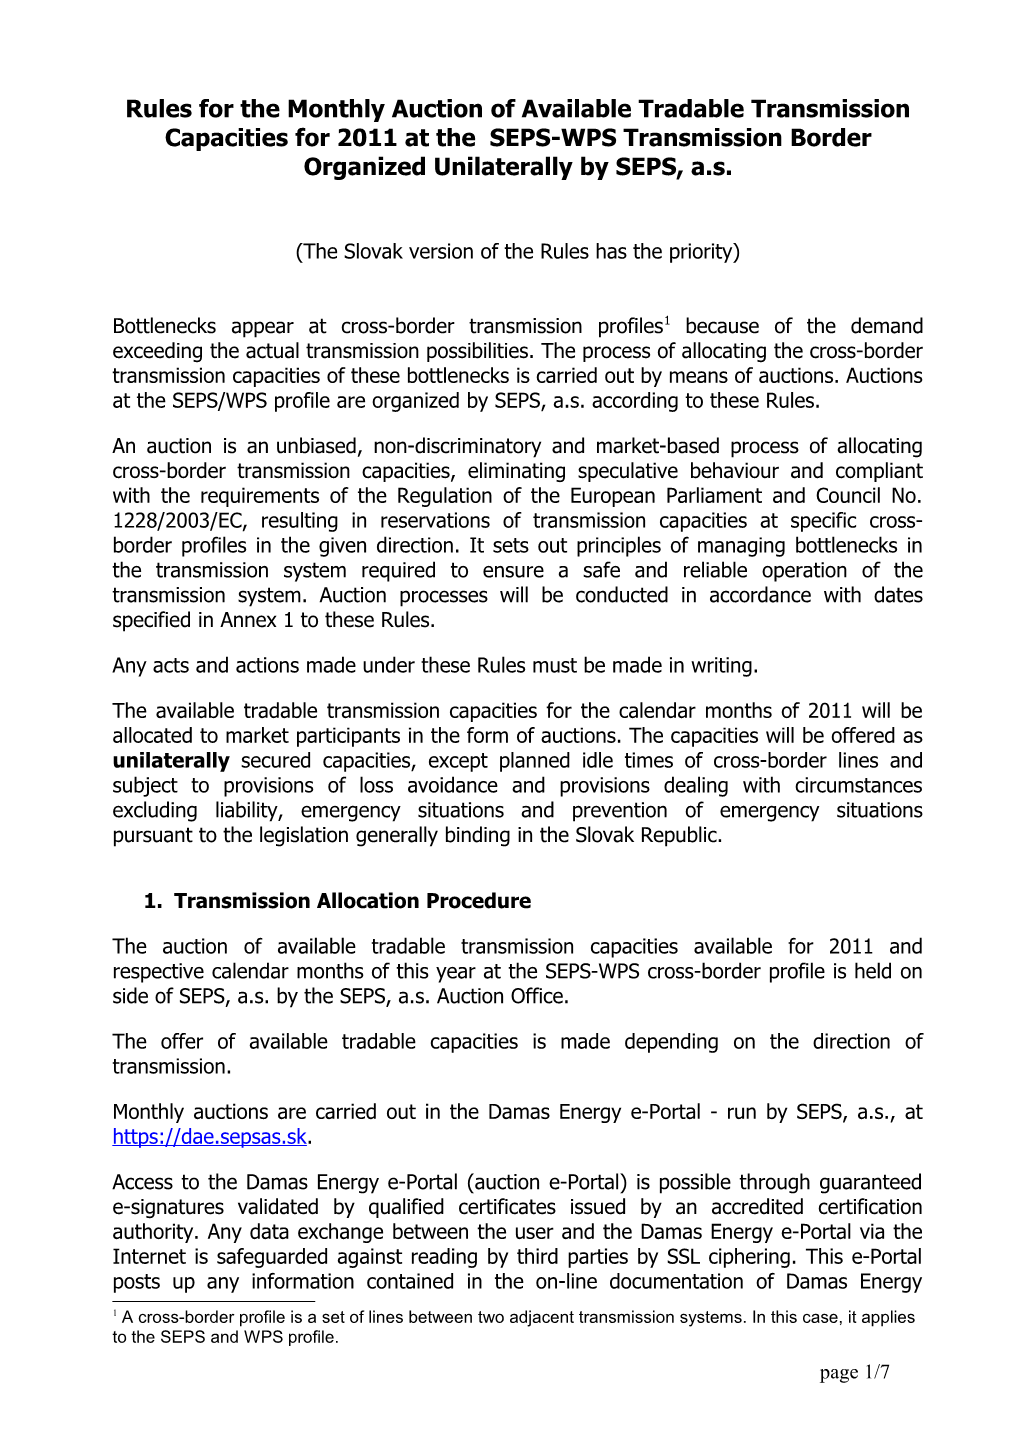 Rules for the 2006 Yearly Auction of Available Tradable Transmission Capacities at The